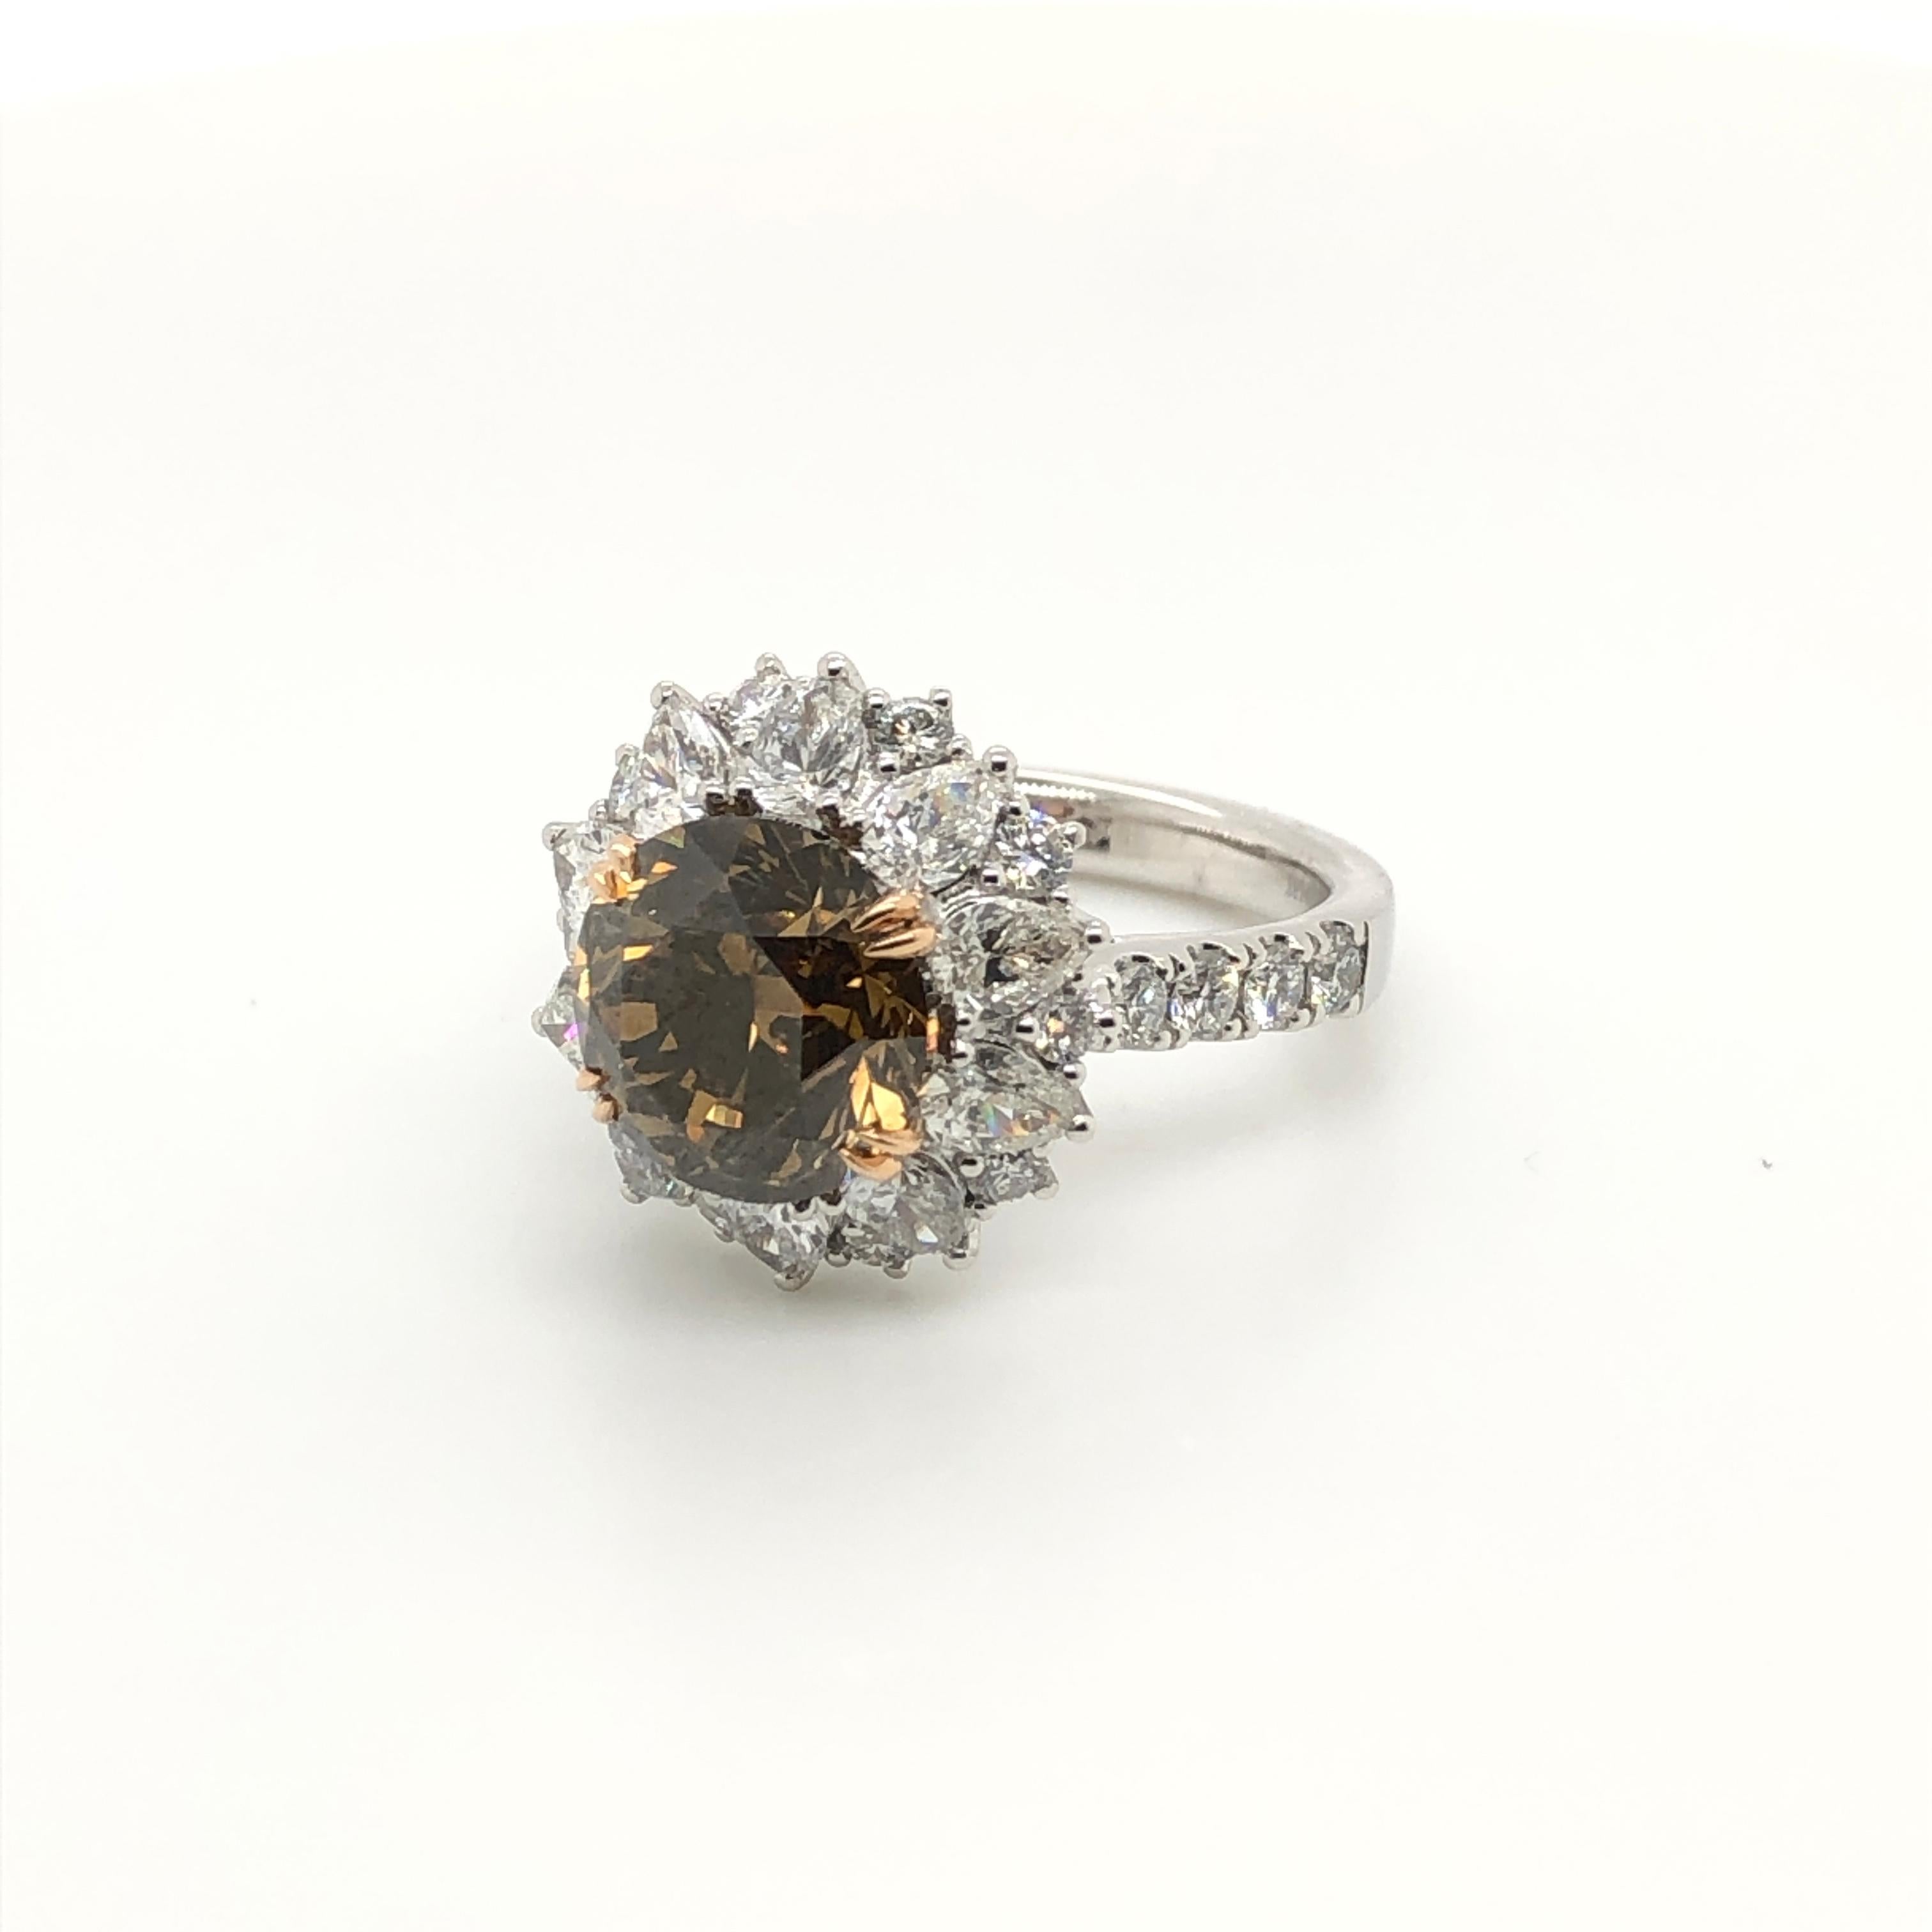 Pear-shaped petals of Vanilla Diamonds border a stunning 4-carat Chocolate Diamond in this Platinum and 18k gold ring from Le Vian Couture, 1-7/8 cts t.w. Vanilla Diamonds.
Ring Size: 7 

A Perfect Gift – Looking for a birthday or Mother’s Day gift